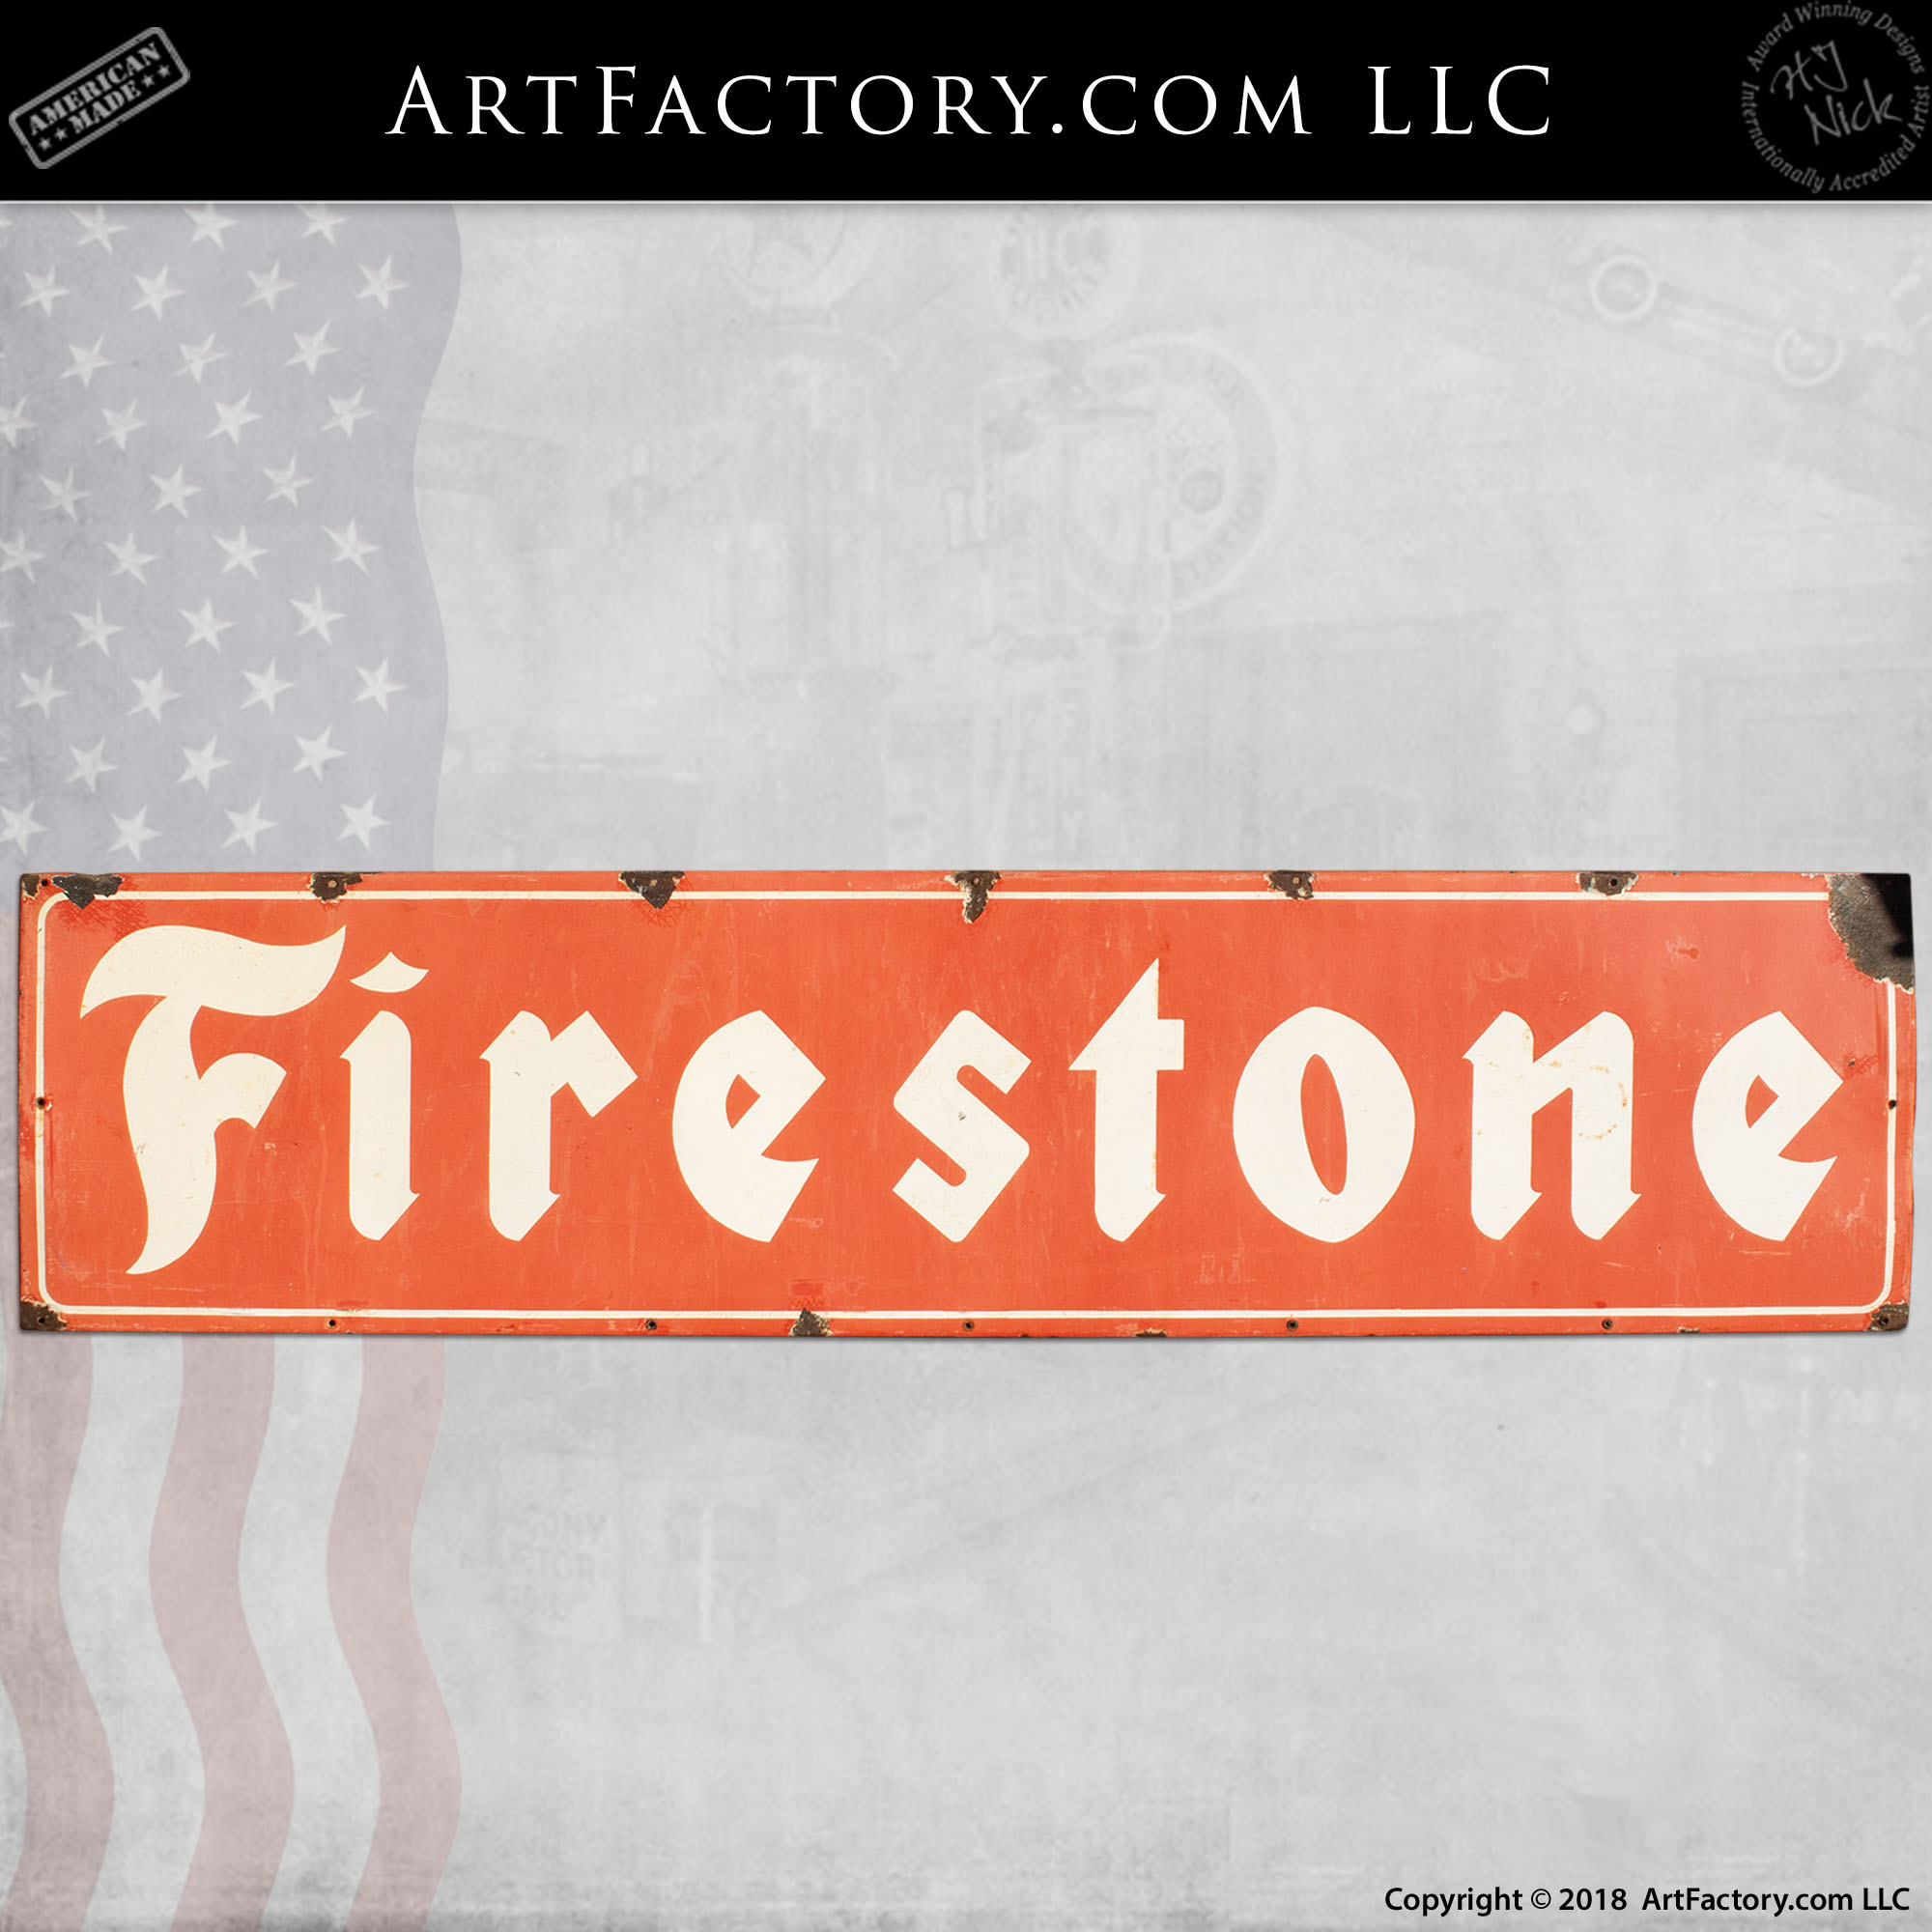 HAND PAINTED WOOD SIGN FIRESTONE ADVERTISING REPRODUCTION  TIRES AMERICANA 